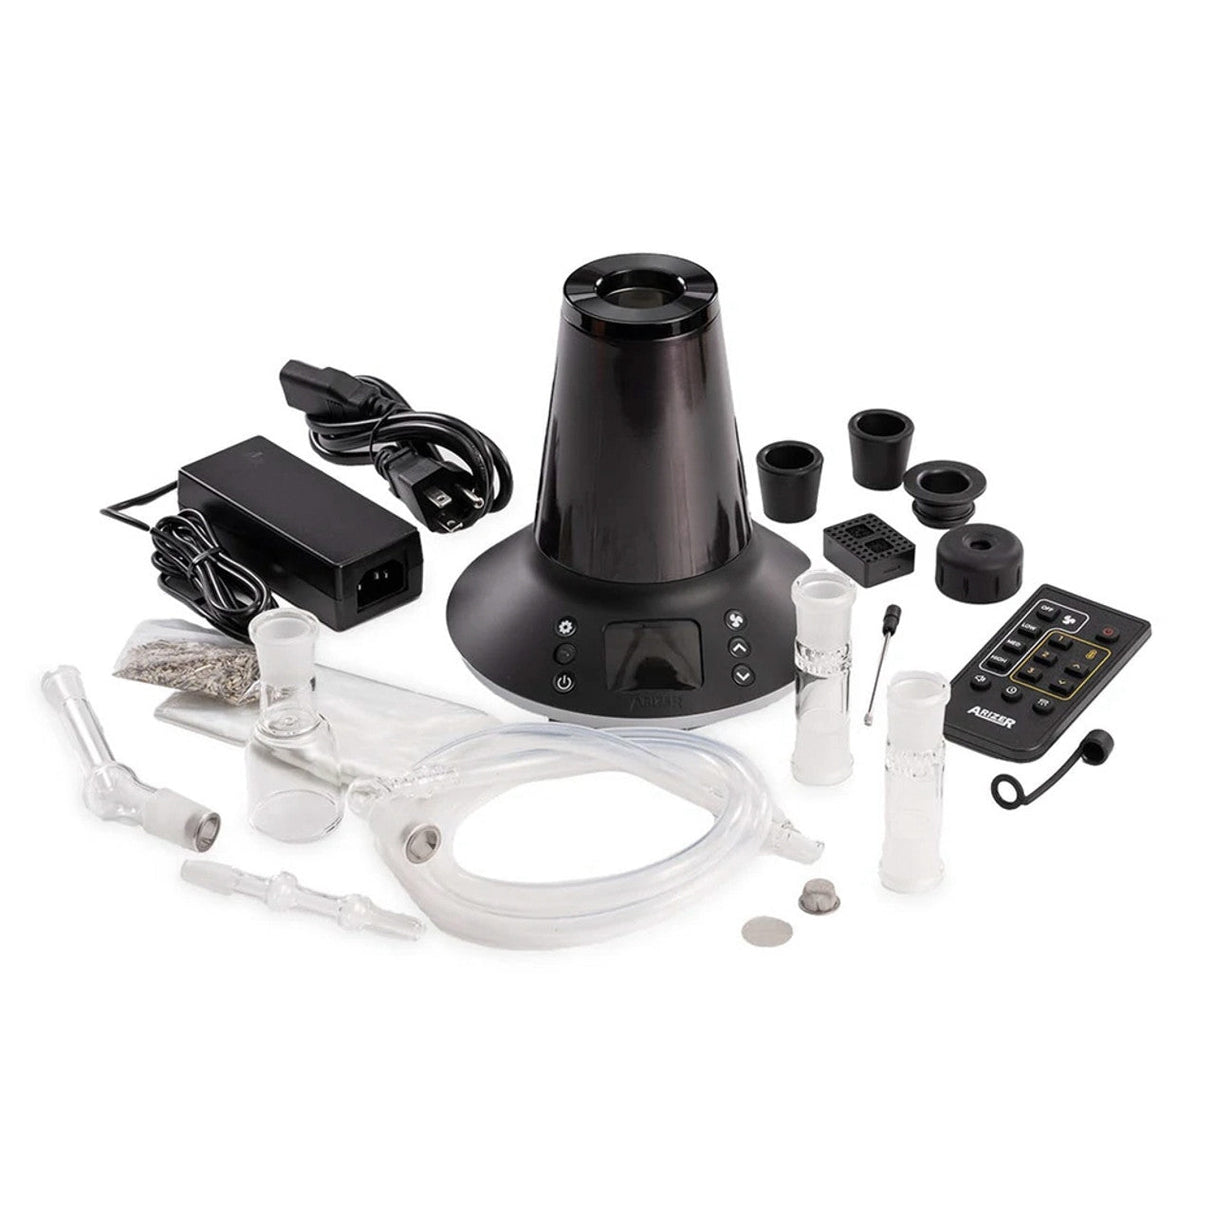 Arizer XQ2 Extreme Q v2 Vaporizer set with glass and ceramic parts, remote, and power cables